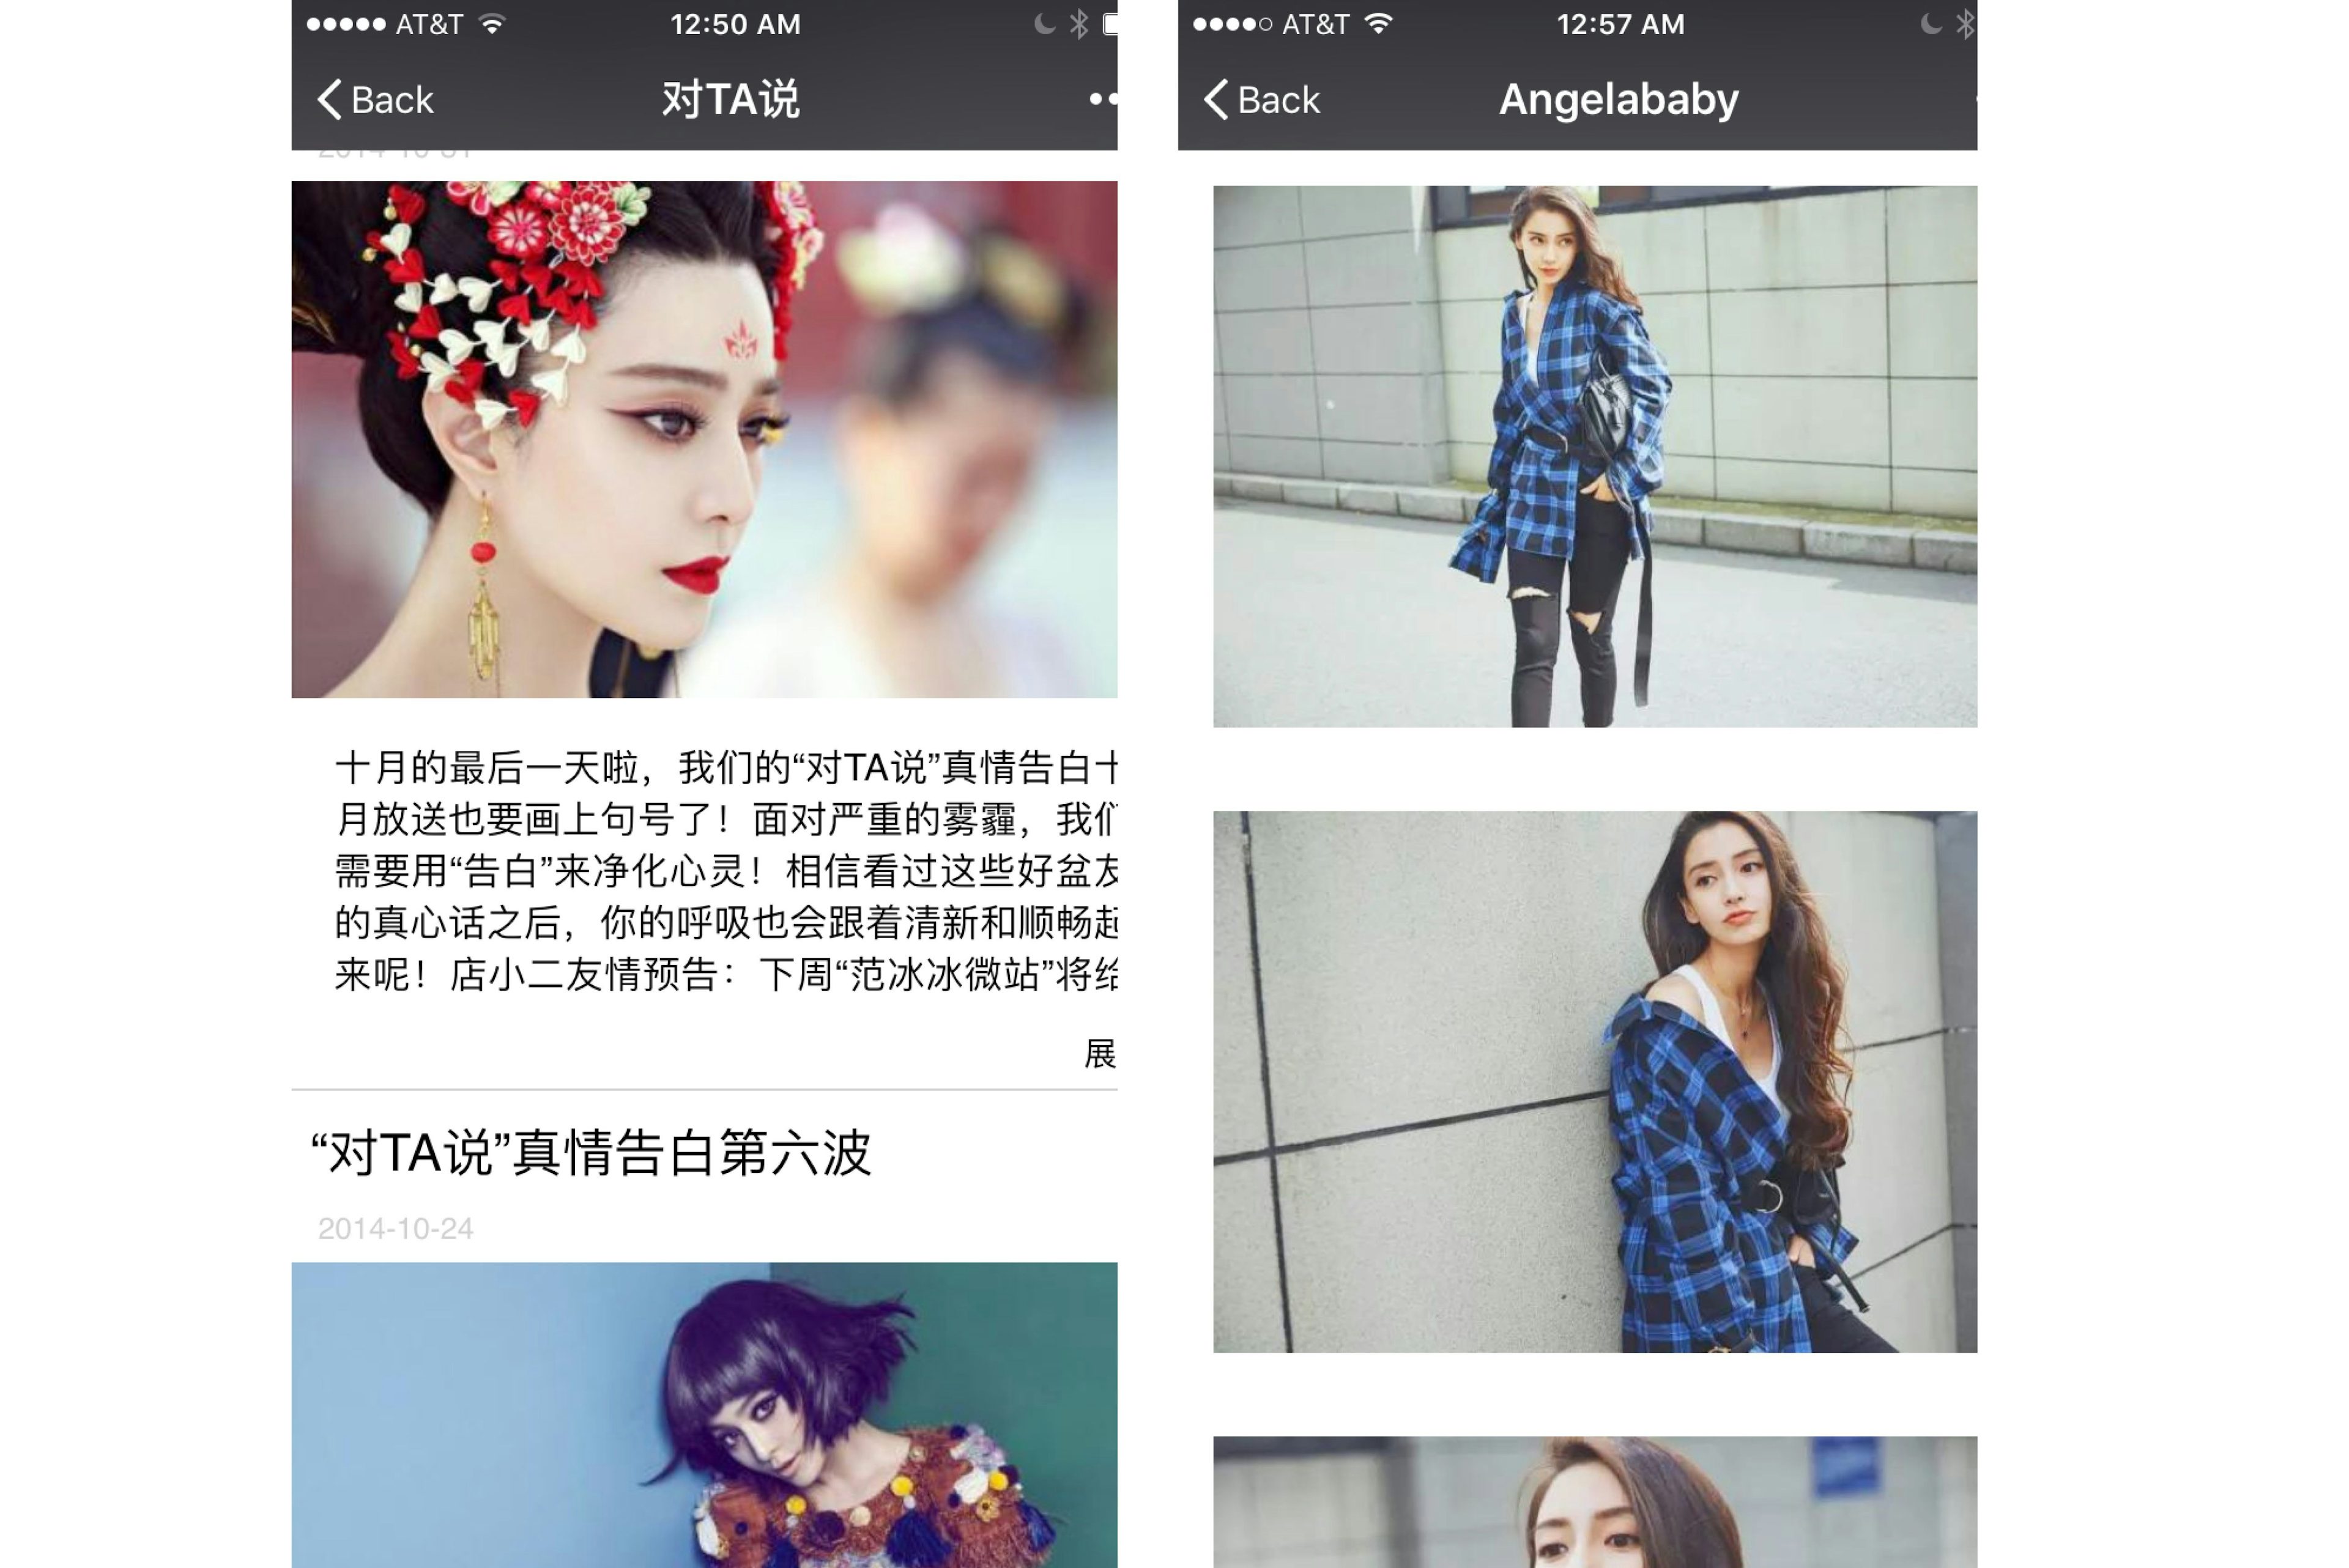 Fan Bingbing, Angelababy, and Taylor Swift Among Top Stars Boosting Luxury Brands on WeChat